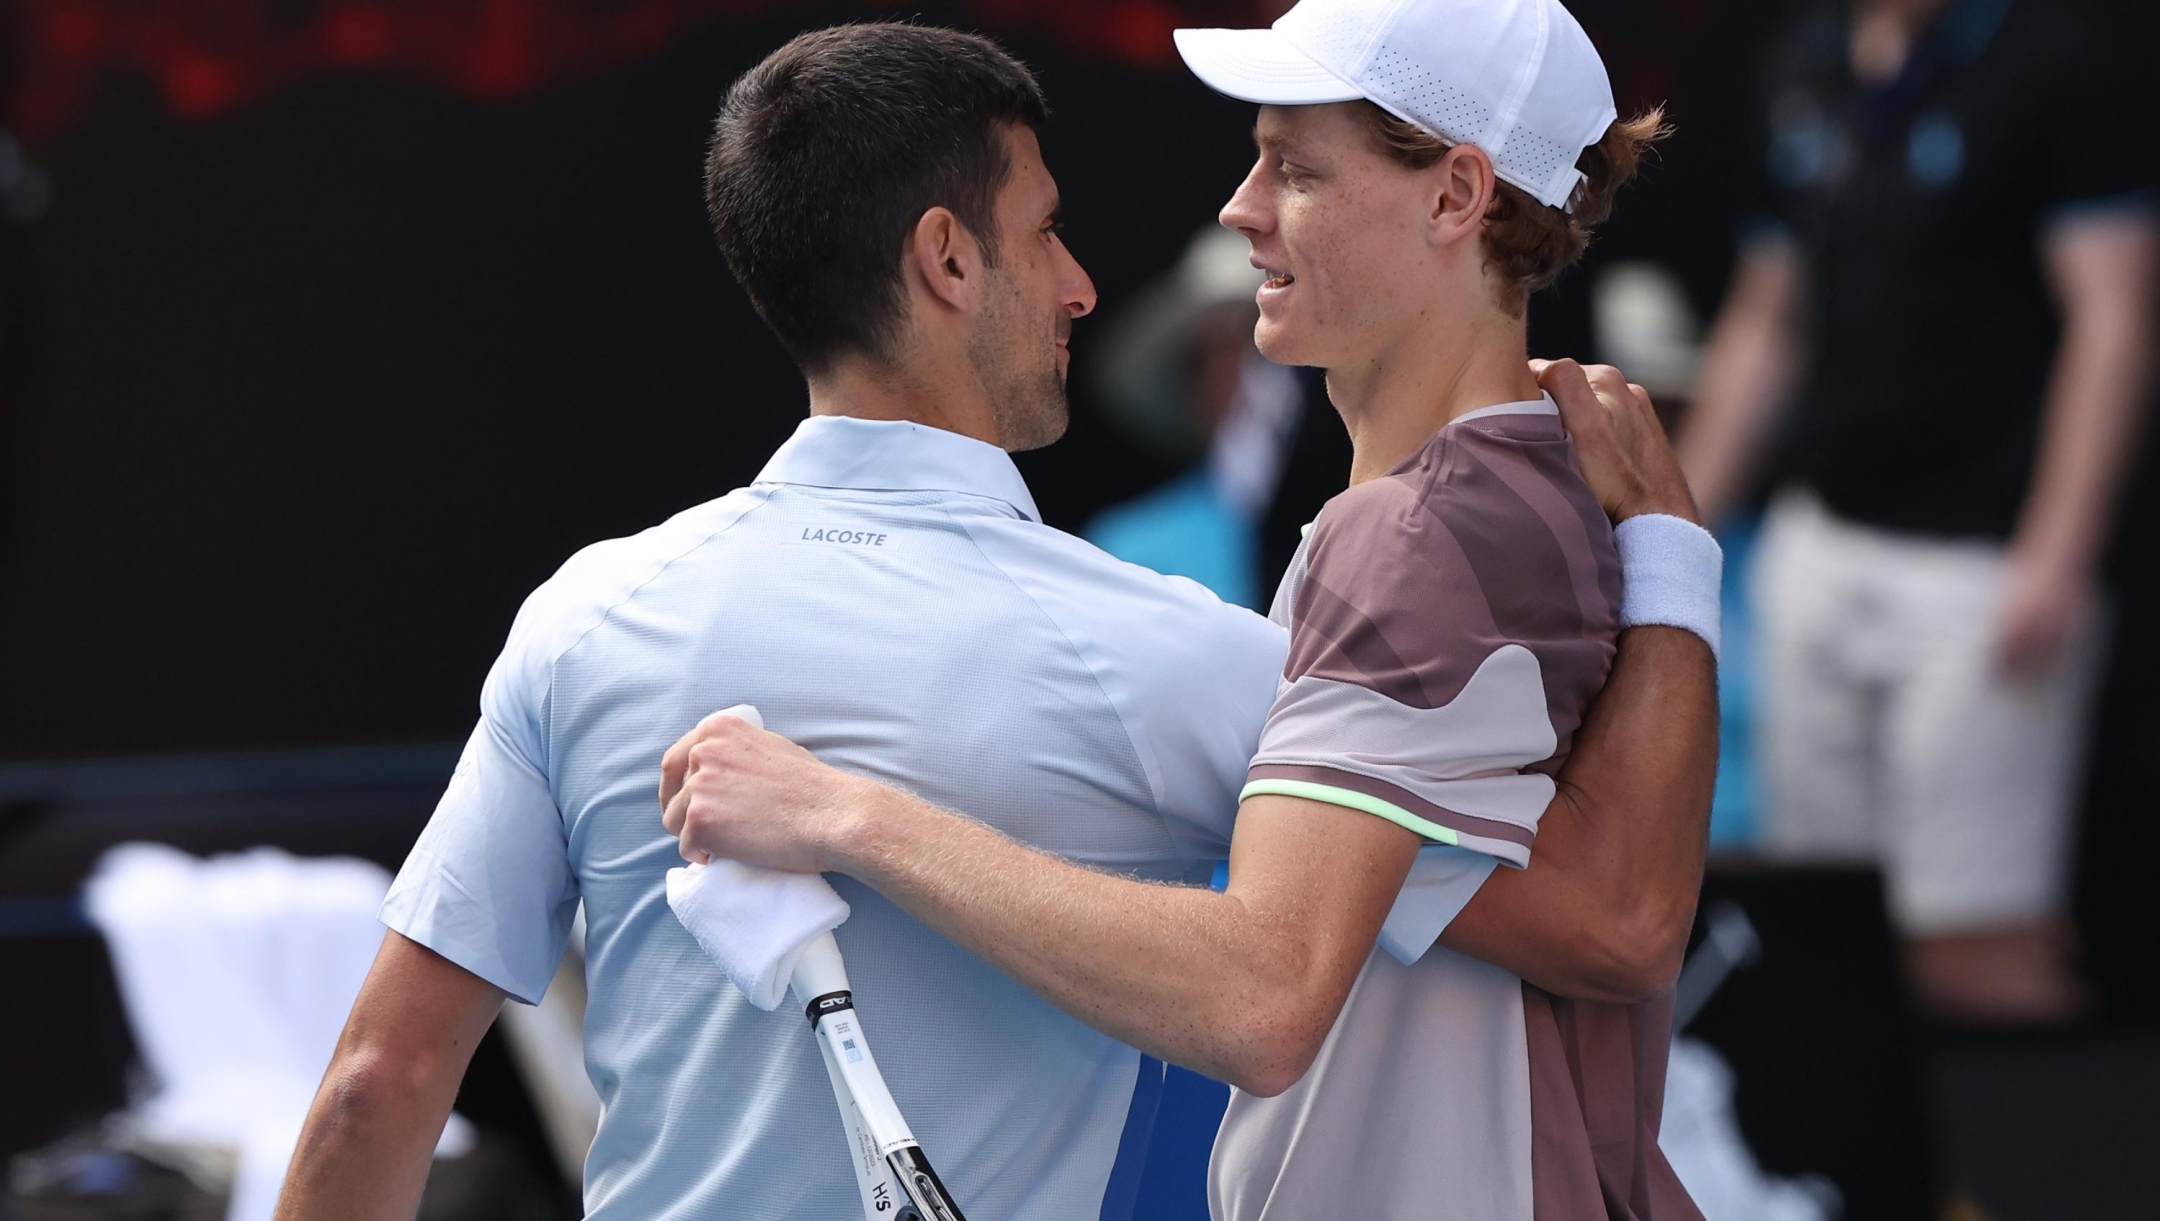 MELBOURNE, AUSTRALIA - JANUARY 26: Jannik Sinner of Italy shakes hands with Novak Djokovic of Serbia in their Semifinal singles match during the 2024 Australian Open at Melbourne Park on January 26, 2024 in Melbourne, Australia. (Photo by Darrian Traynor/Getty Images)